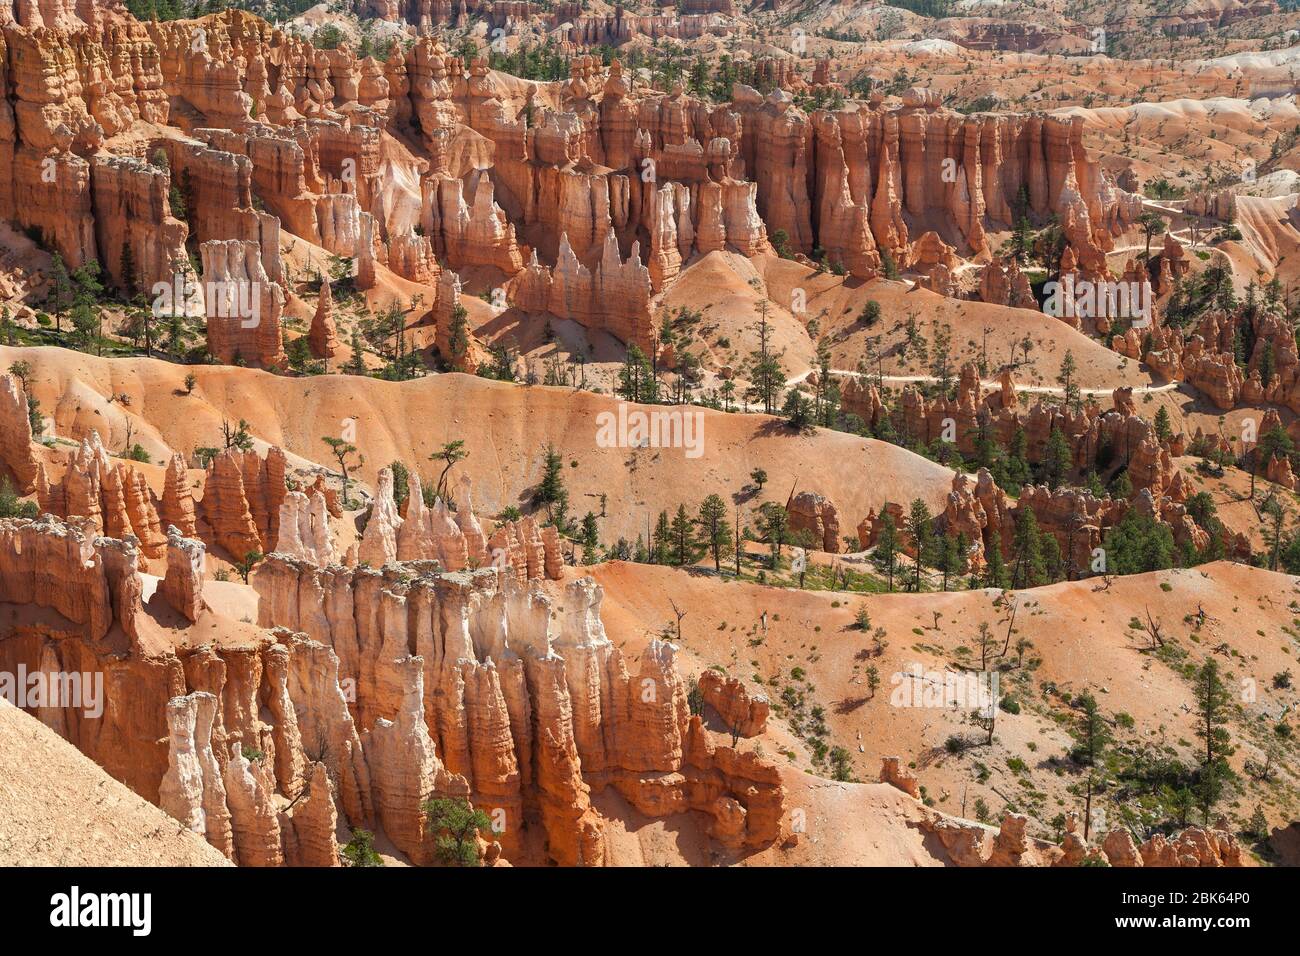 Queen's Garden at Bryce Canyon National Park, Utah, United States. Stock Photo